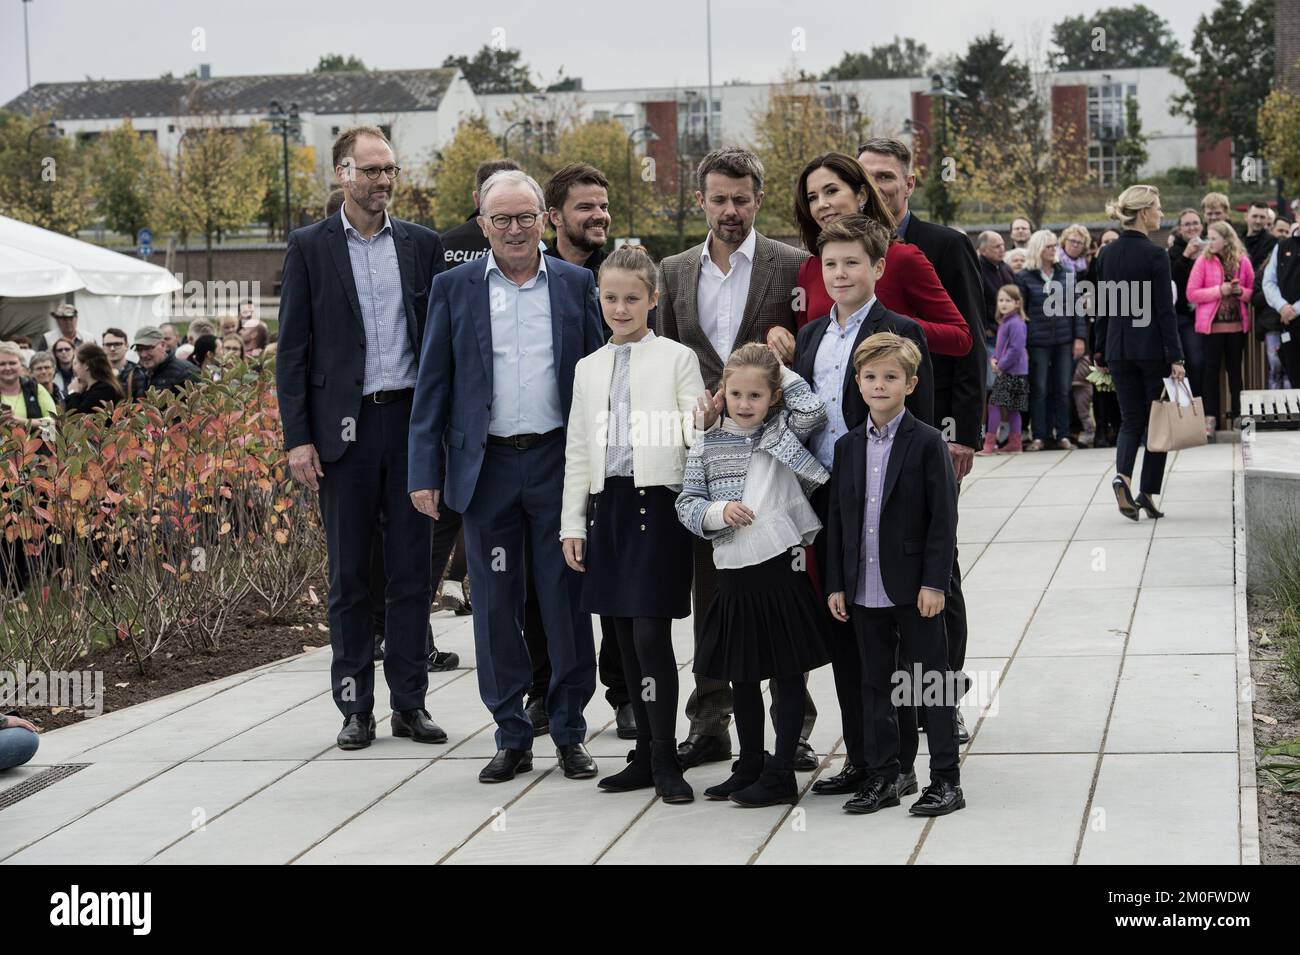 The Danish Crown Prince Frederik and Crown Prince Mary and their four children attended the opening of the new â€˜LEGO Houseâ€™ in Billund, Denmark, September 28, 2017. The building inspired by the famous Danish LEGO-bricks was designed by Danish architect Bjarke Ingels and offers indoor activities such as LEGO play zones, restaurants and conference facilities. Pictured from the left is JÃ¸rgen Vig Knudstorp, Kjeld Kirk Kristiansen,Â Bjarke Ingels, Crown Prince Frederik, Crown Princess Mary,Â  Jesper Vildstrup, Princess Isabella, Prince Christian and the twins Princess Josephine and Prince Vin Stock Photo